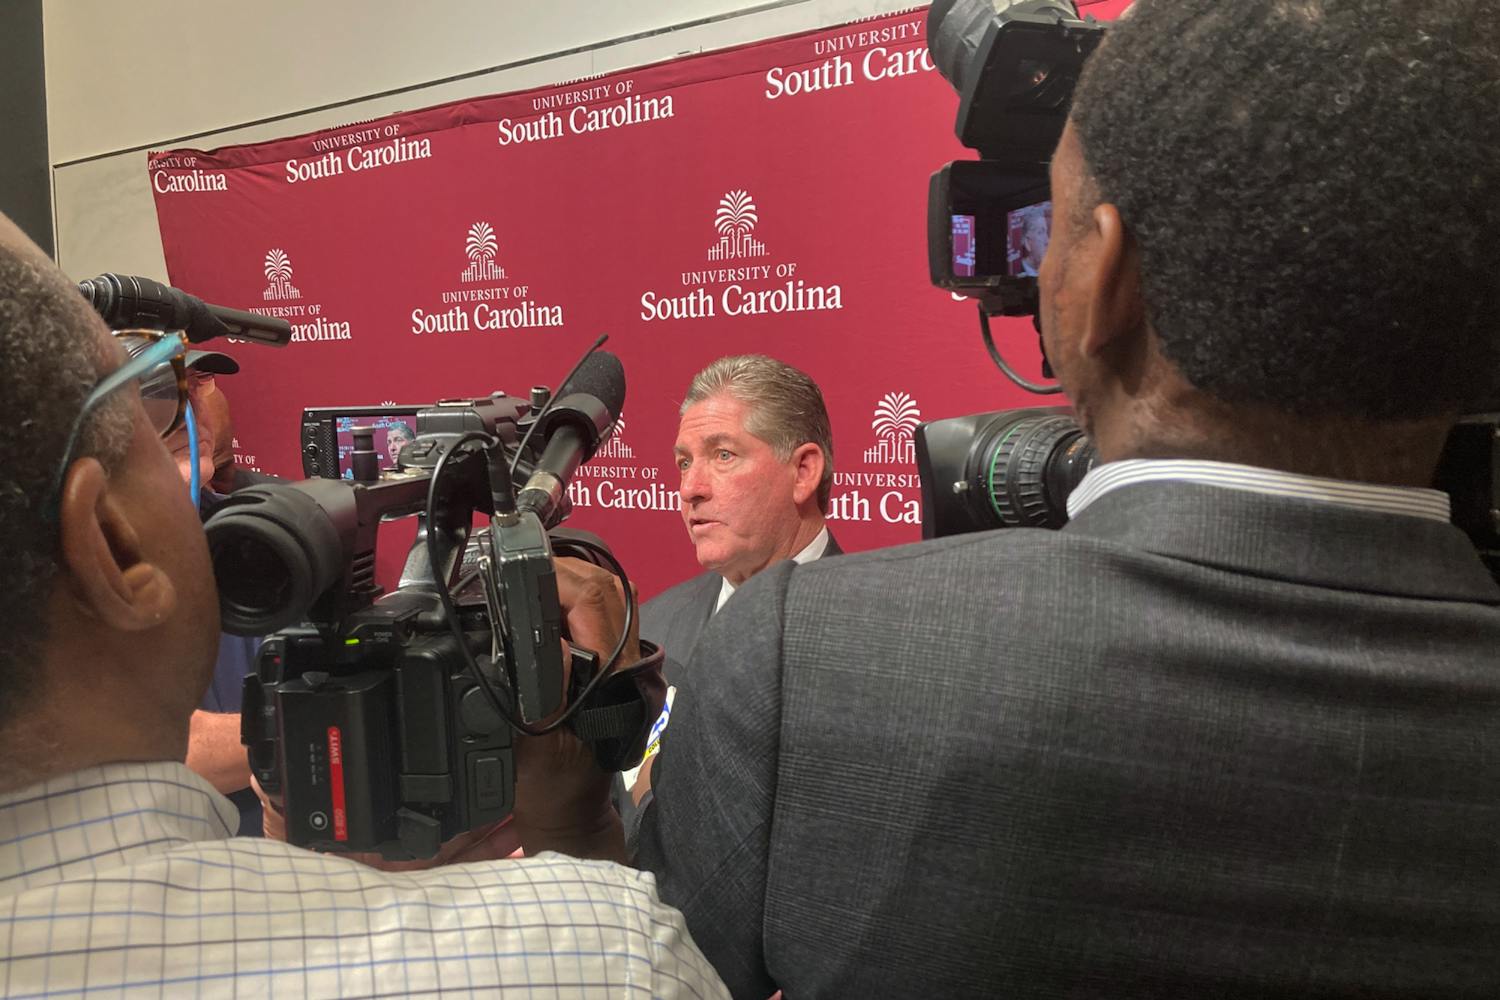 The University of South Carolina’s Athletic Director, Ray Tanner, states the recommendations to update the surrounding 889 acres around Williams-Brice Stadium on Feb. 7, 2023. The exact plan of what will be built has yet to be fully confirmed, but there is a possibility that the land will be turned into new student housing properties, apartments or restaurants.